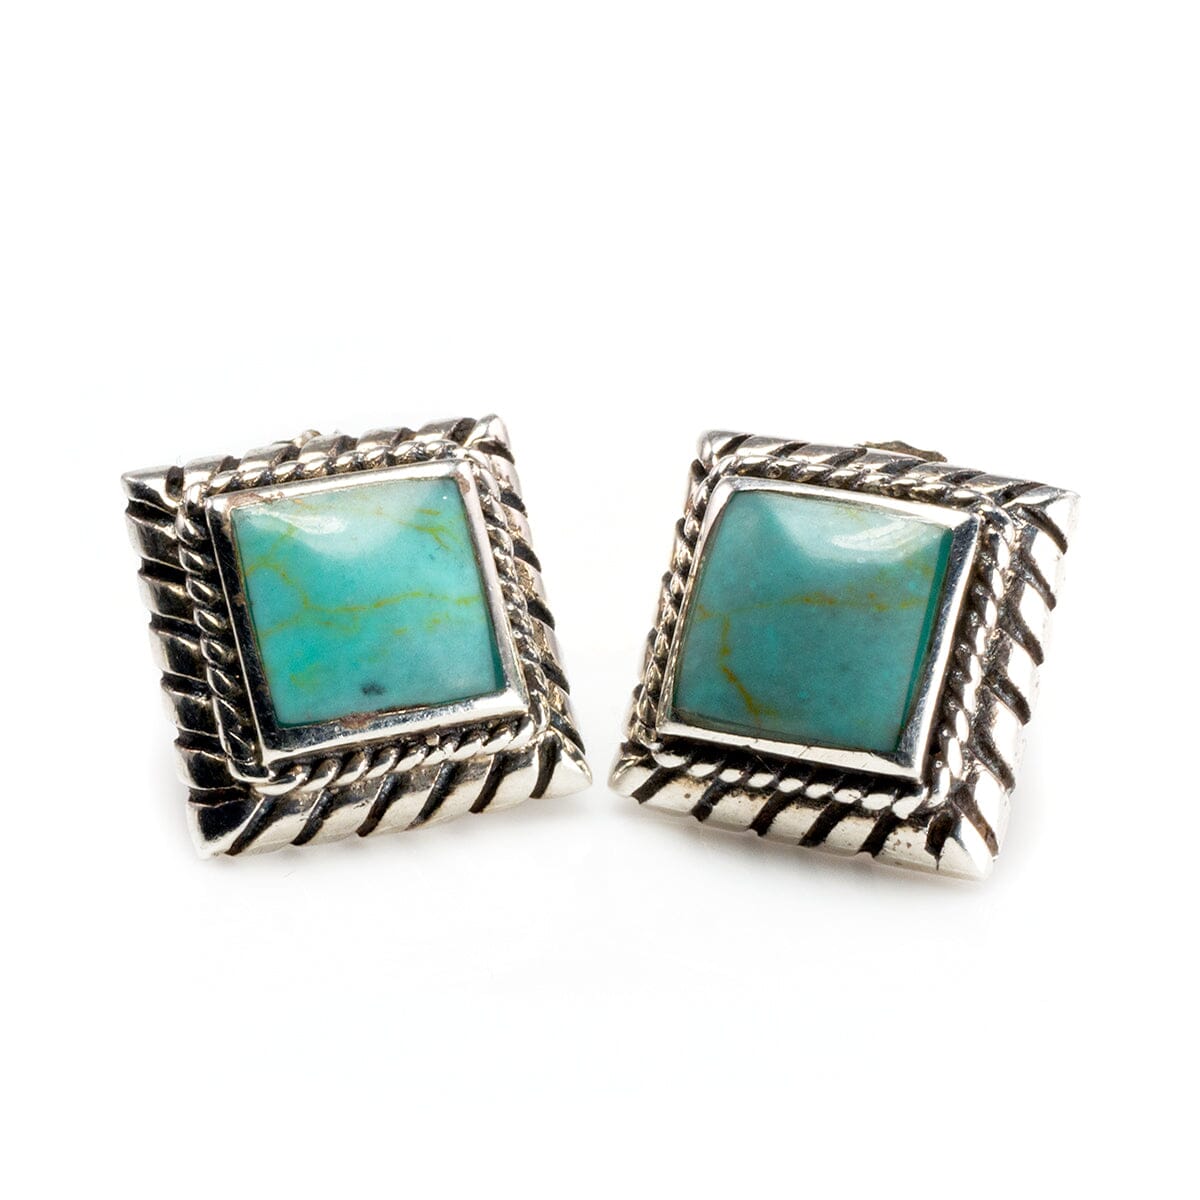 Great Lakes Boutique Silver and Turquoise Earrings